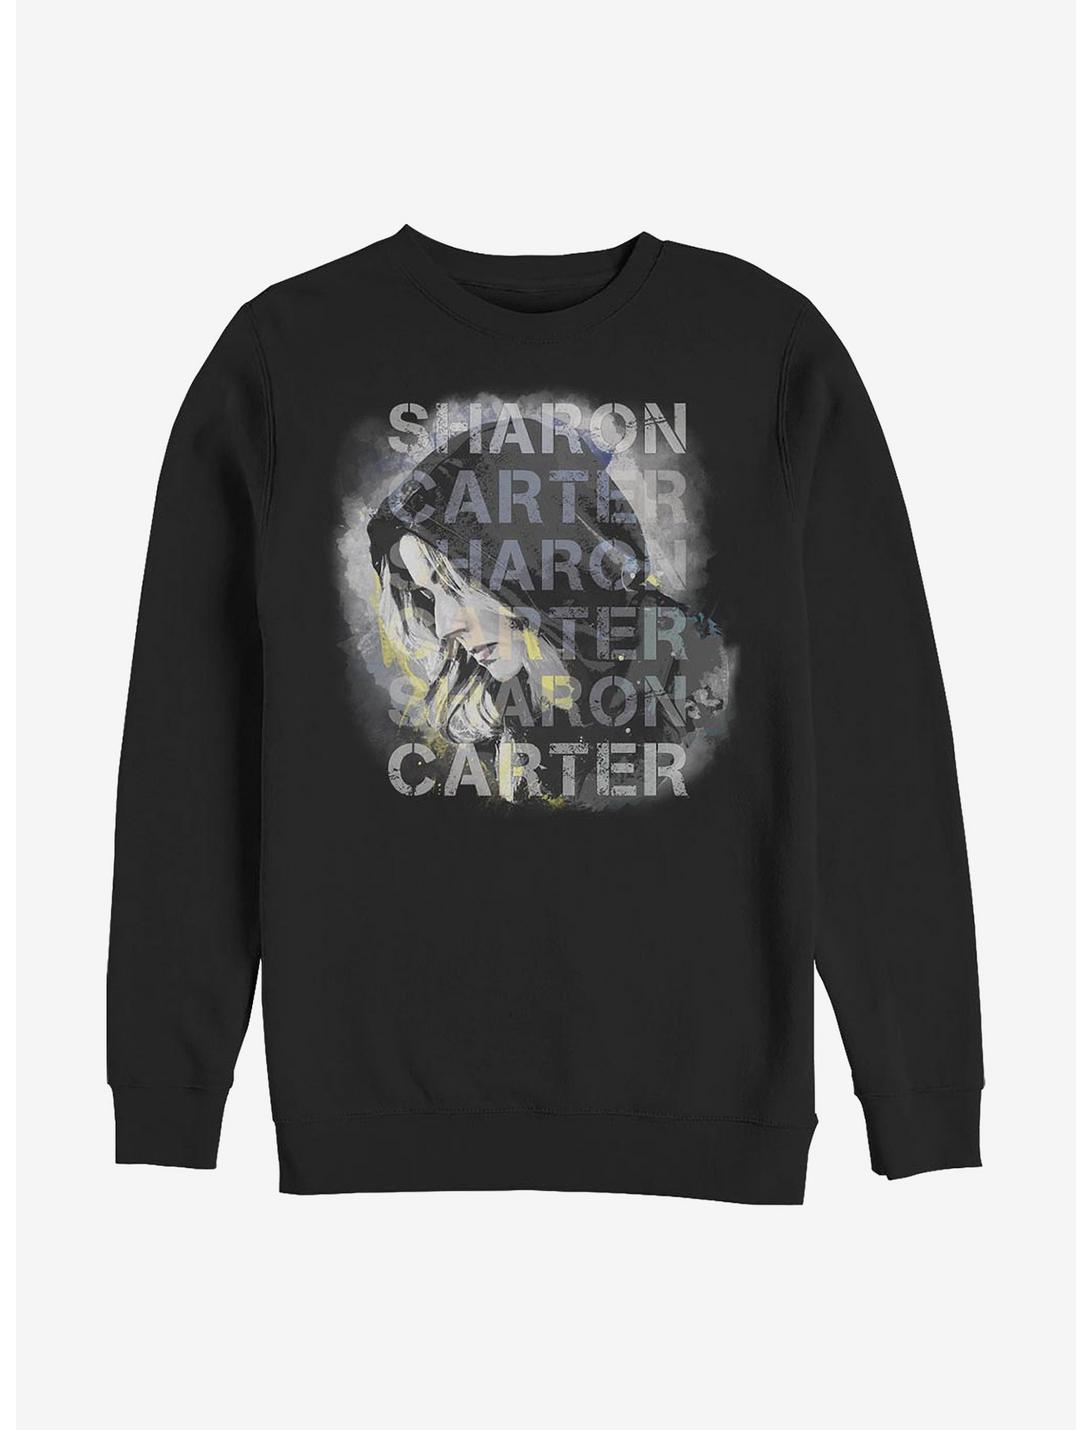 Marvel The Falcon And The Winter Soldier Carter Overlay Sweatshirt, BLACK, hi-res